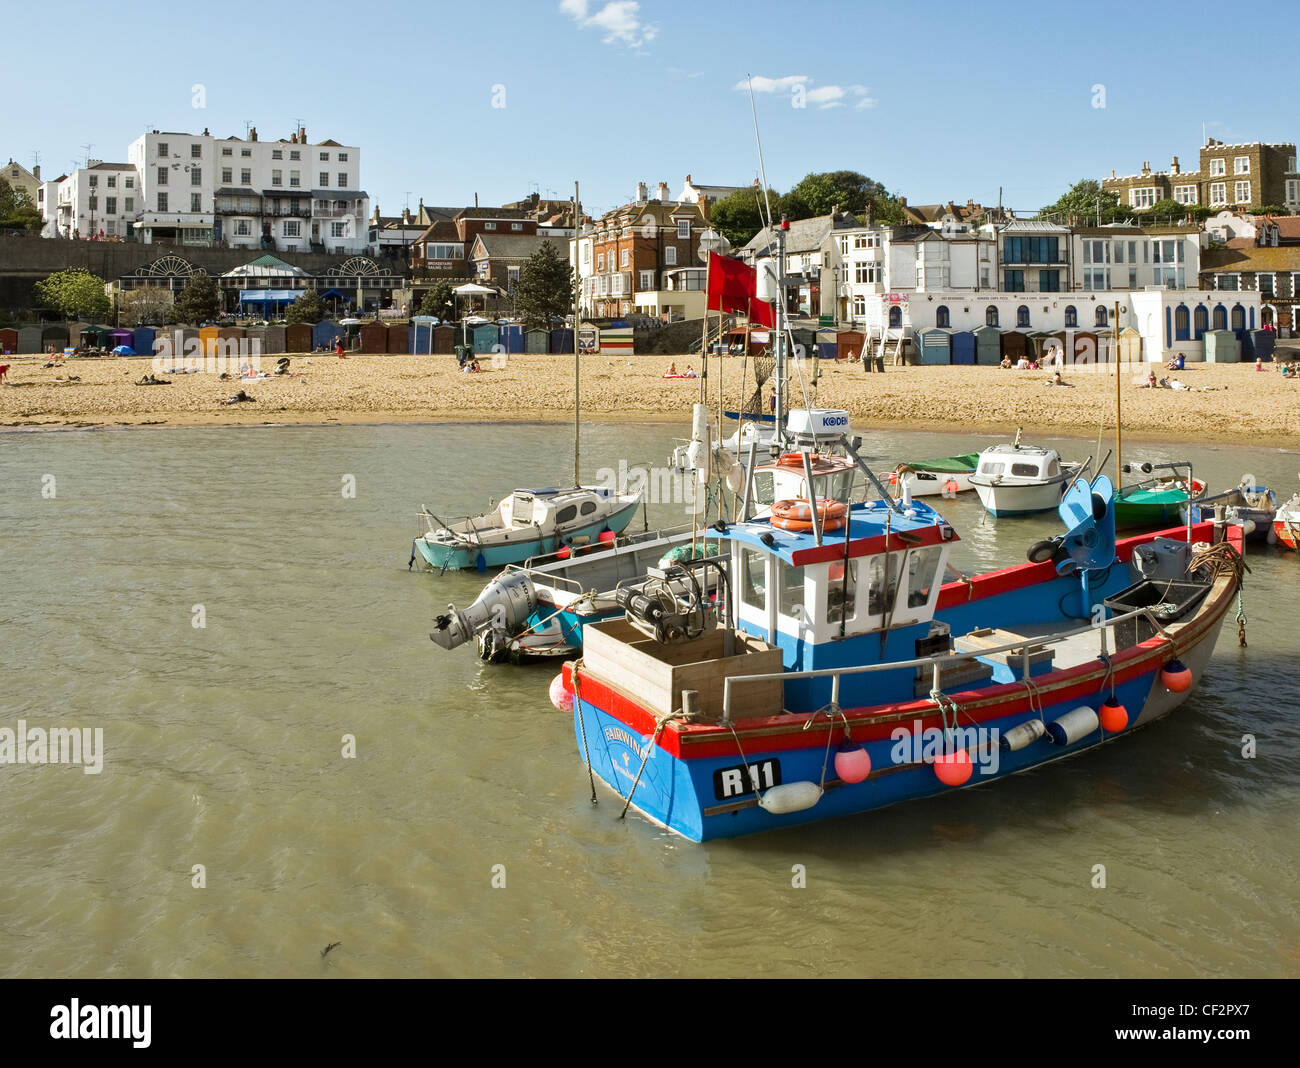 Boats moored at Broadstairs, a seaside resort on the Isle of Thanet. Stock Photo